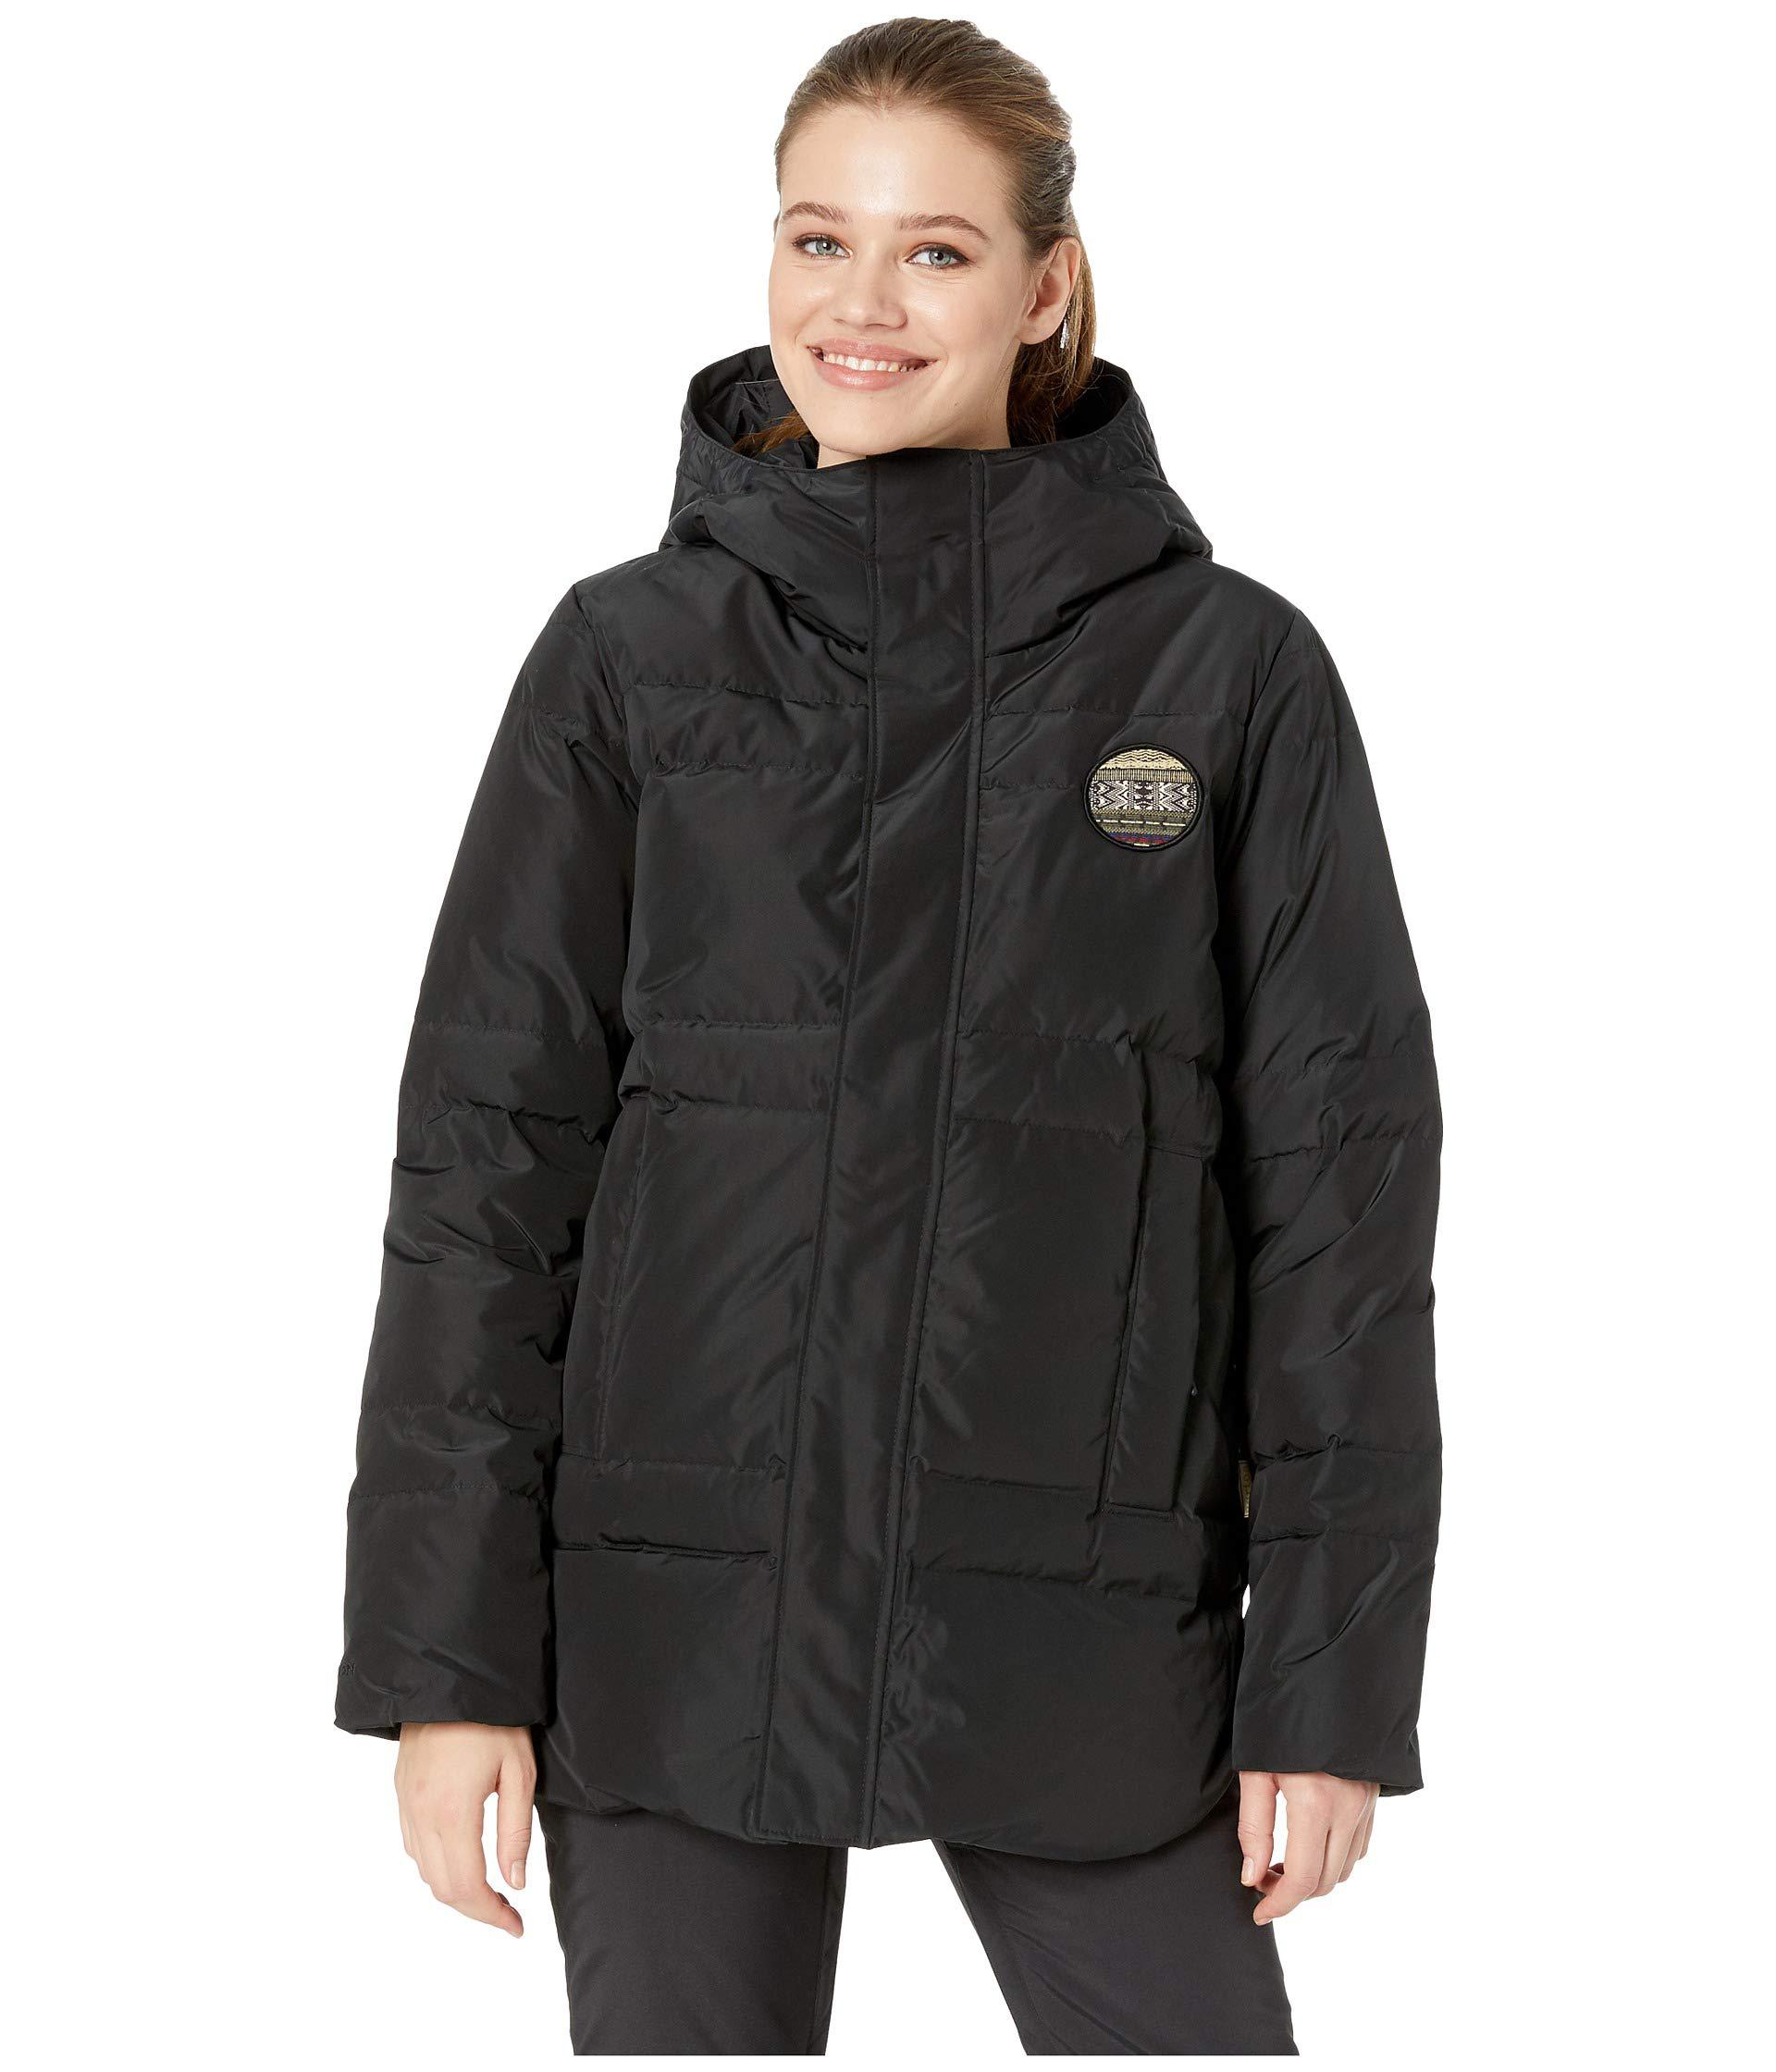 Purchase > burton mora moss jacket, Up to 60% OFF